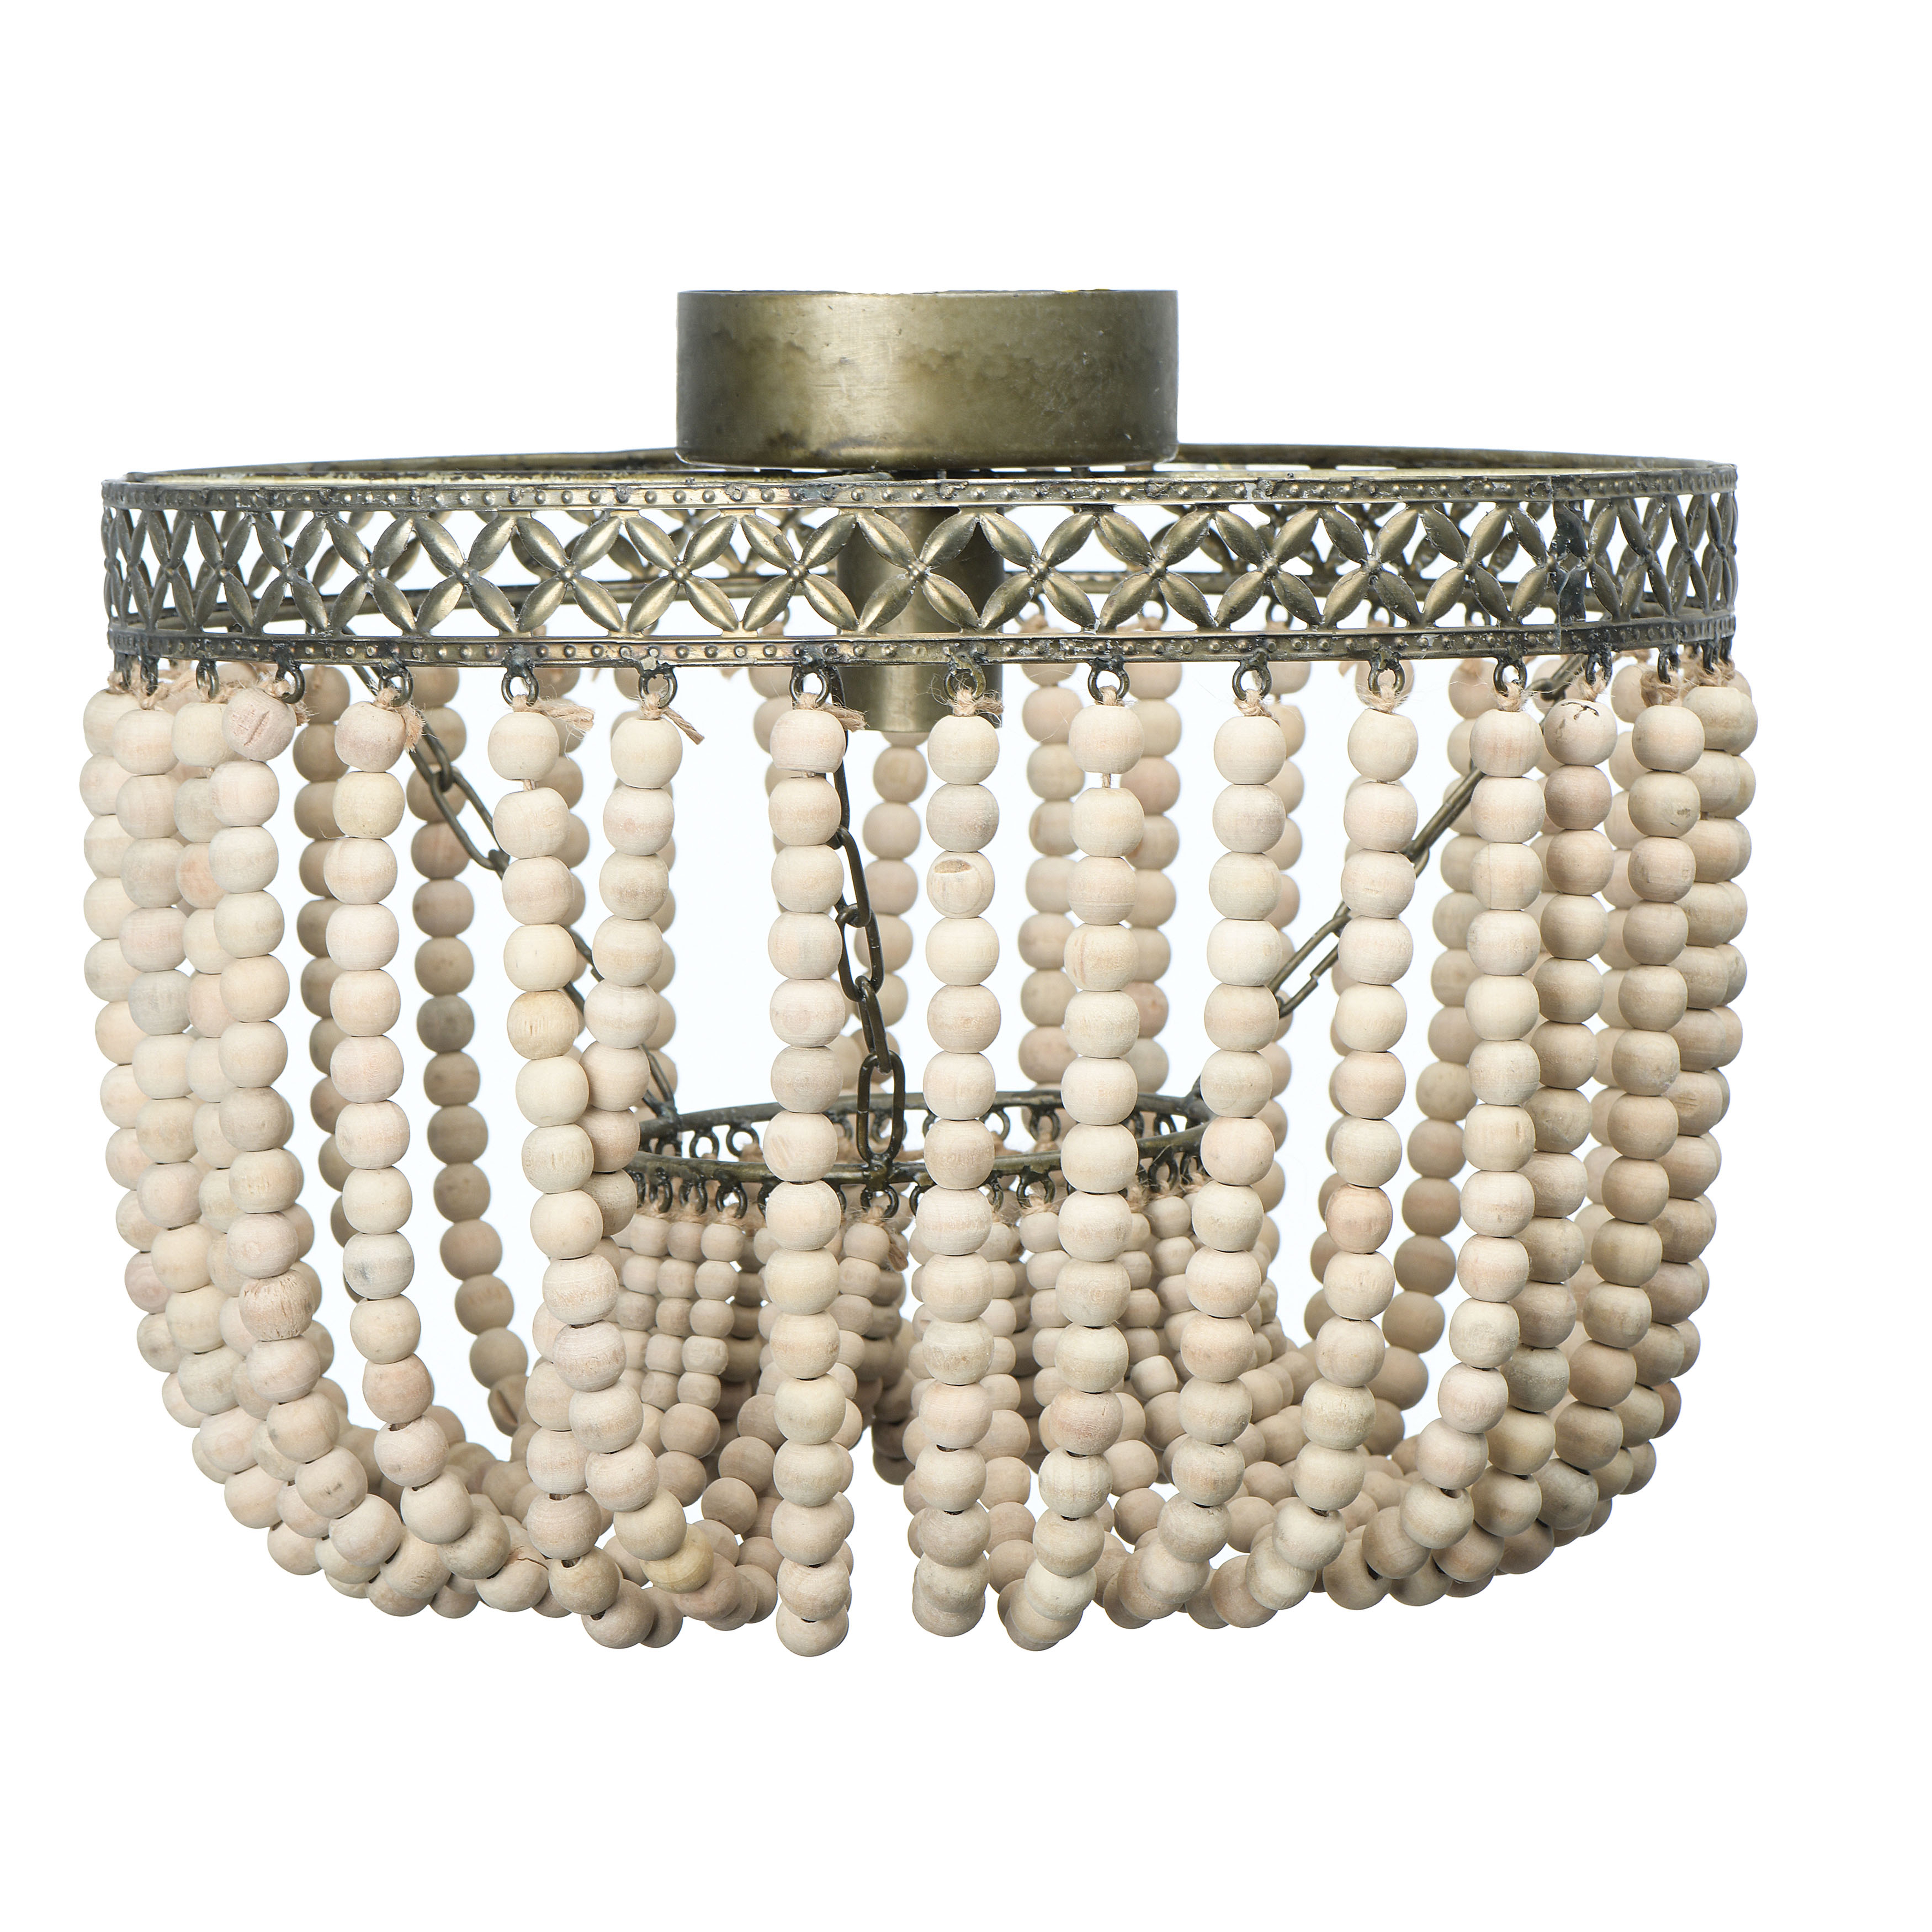 Draped Wood Bead Chandelier - Nomad Home